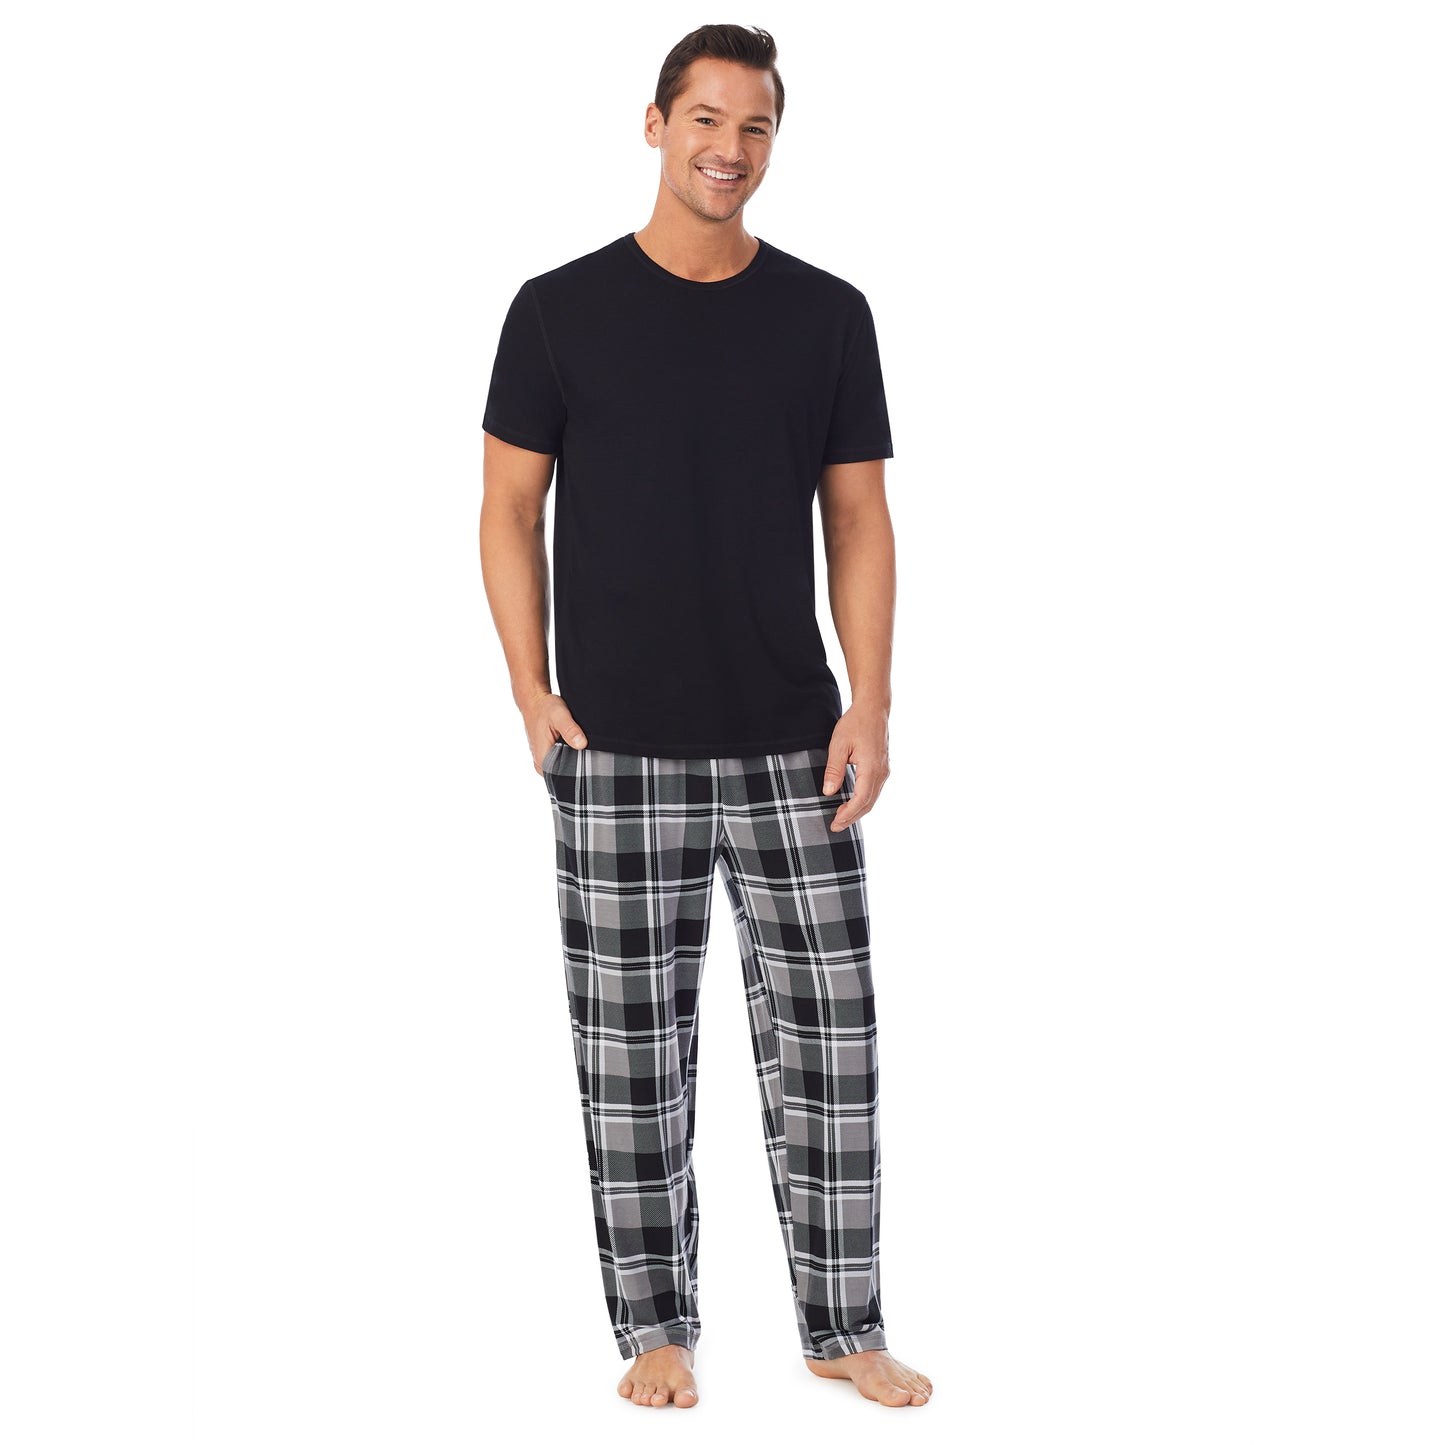 Red Plaid;Model is wearing size M. He is 6'2", Waist 32", Inseam 32".@ A lady wearingMens Short Sleeve Crew Neck Top and Pant Pajama Set with Red Plaid print